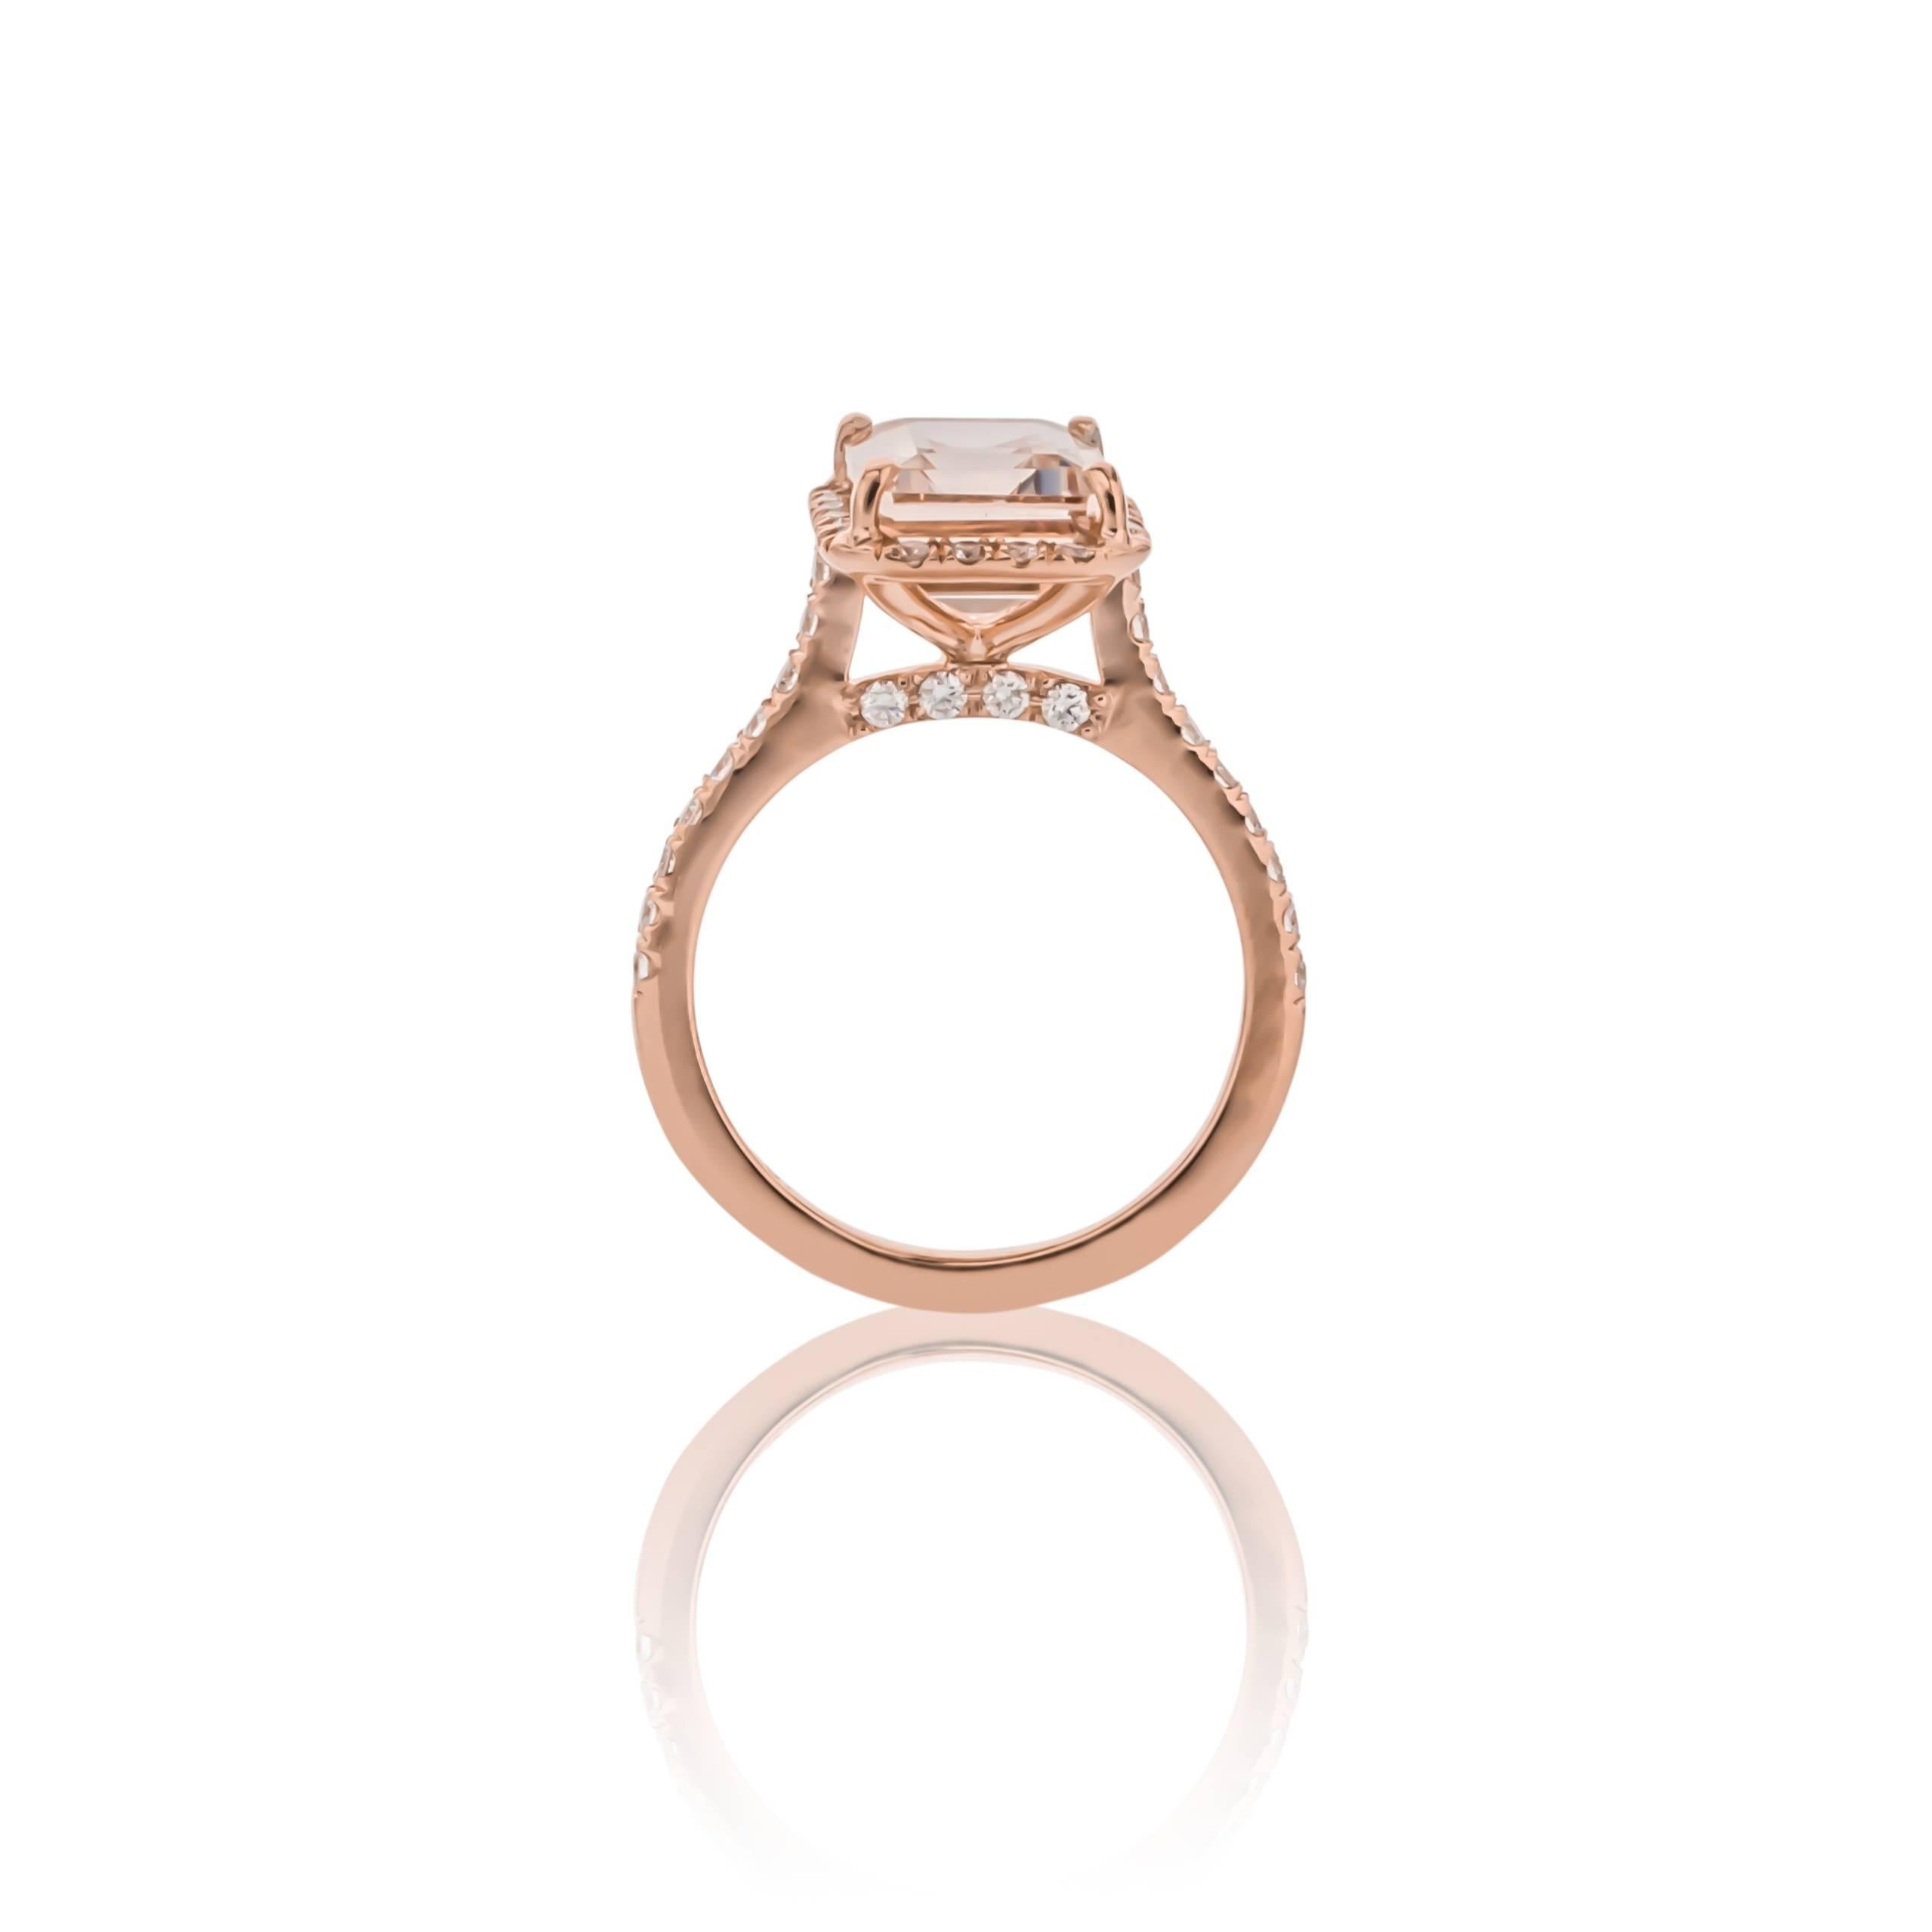 Women's One of a Kind 3.58 Carat Morganite and Diamond Ring